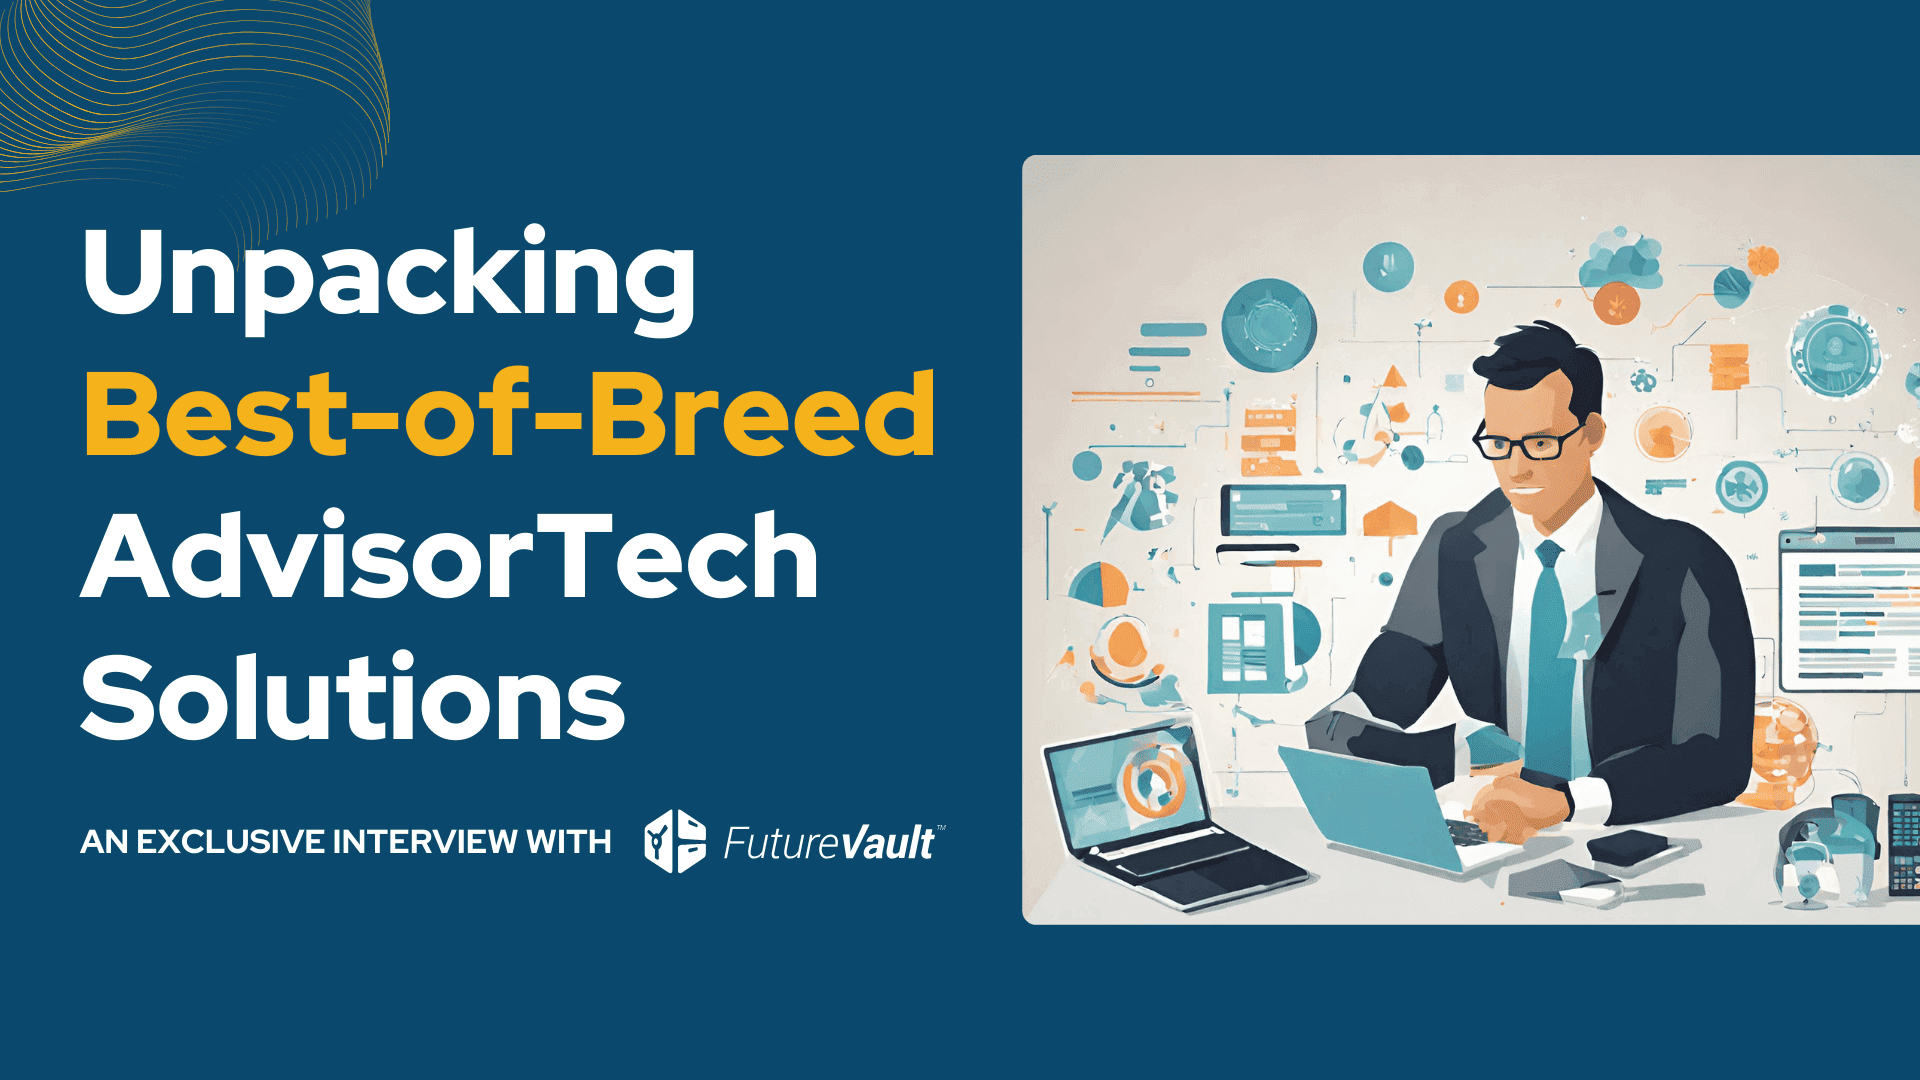 Unpacking Best-of-Breed AdvisorTech Solutions with FutureVault